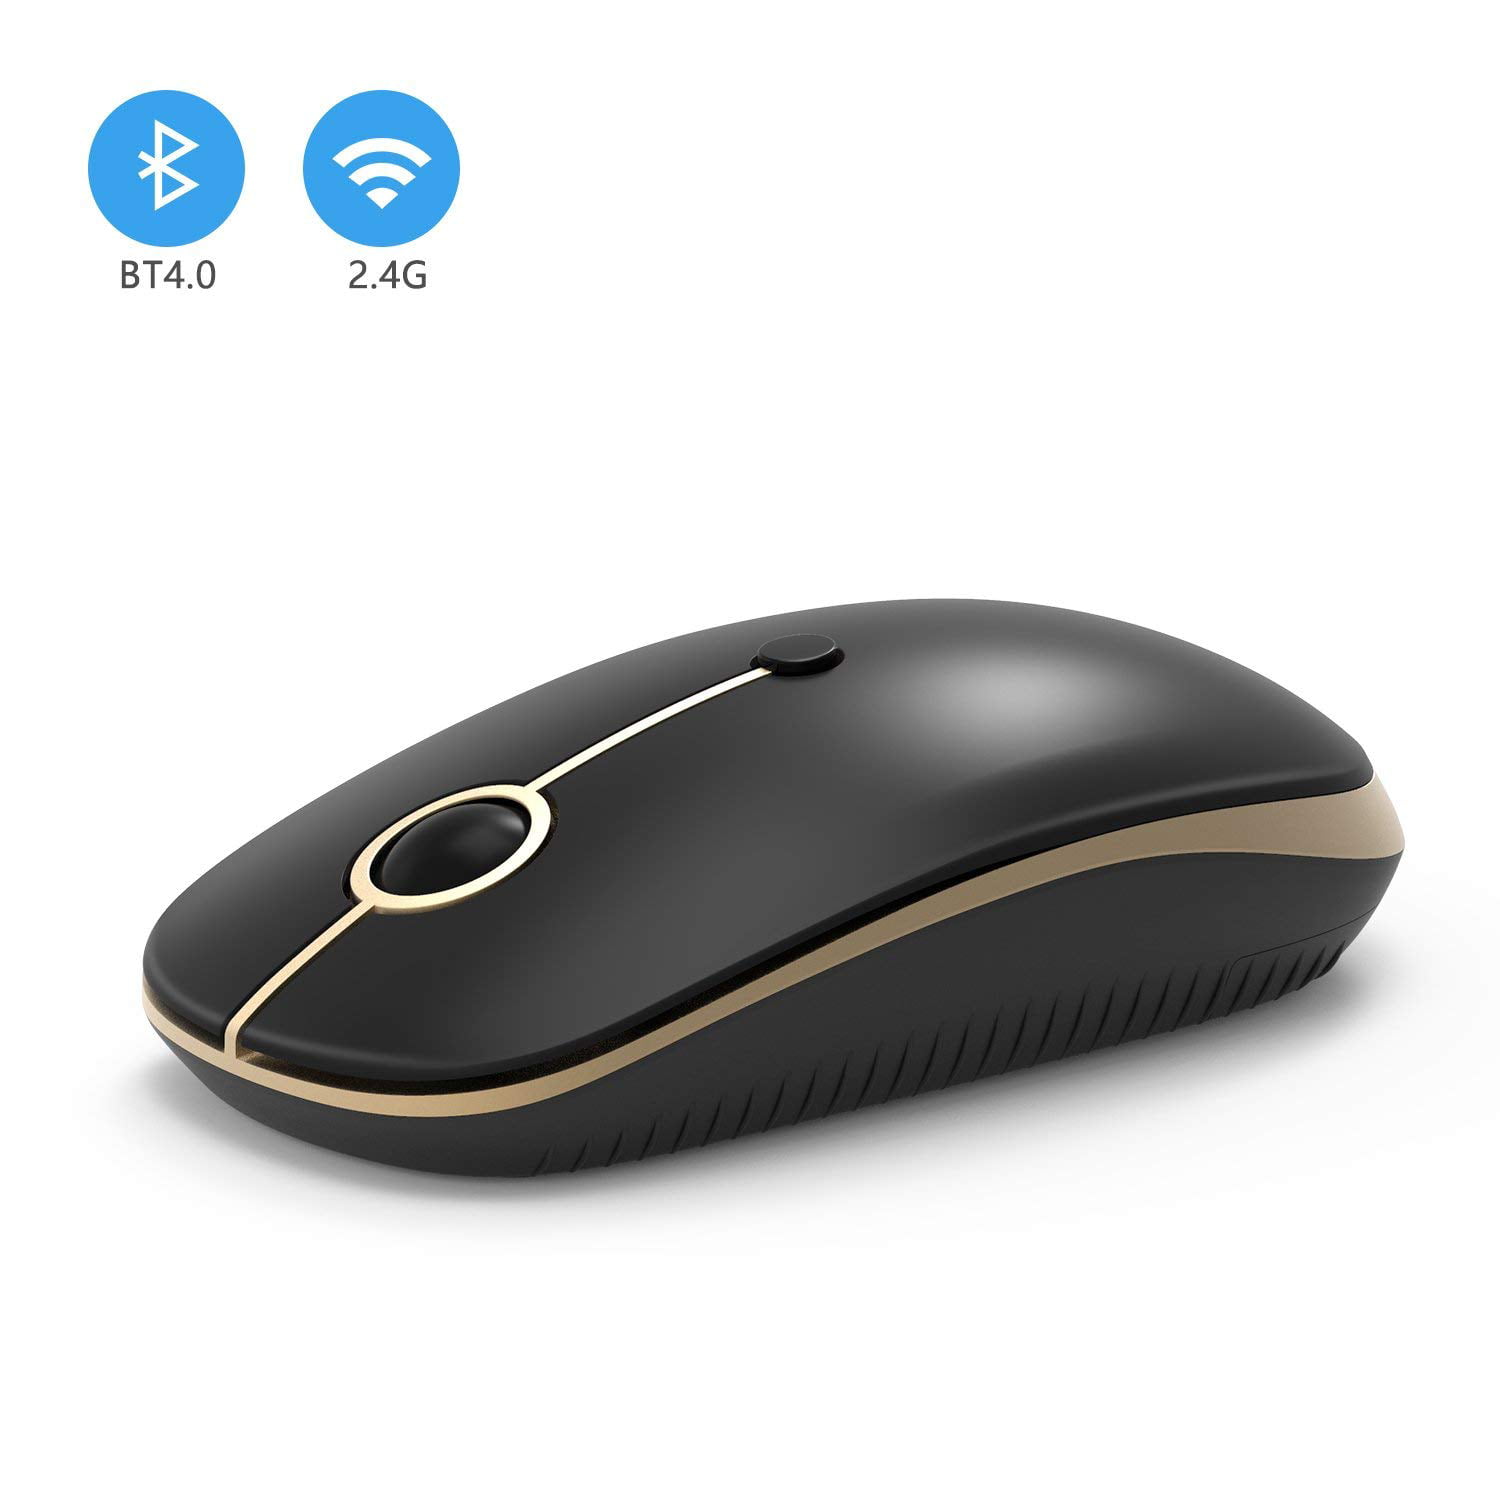 Alician Ergonomic Wireless Mouse 2.4G 2400DPI Optical Gaming Mouse for Laptop Computer Star Black 